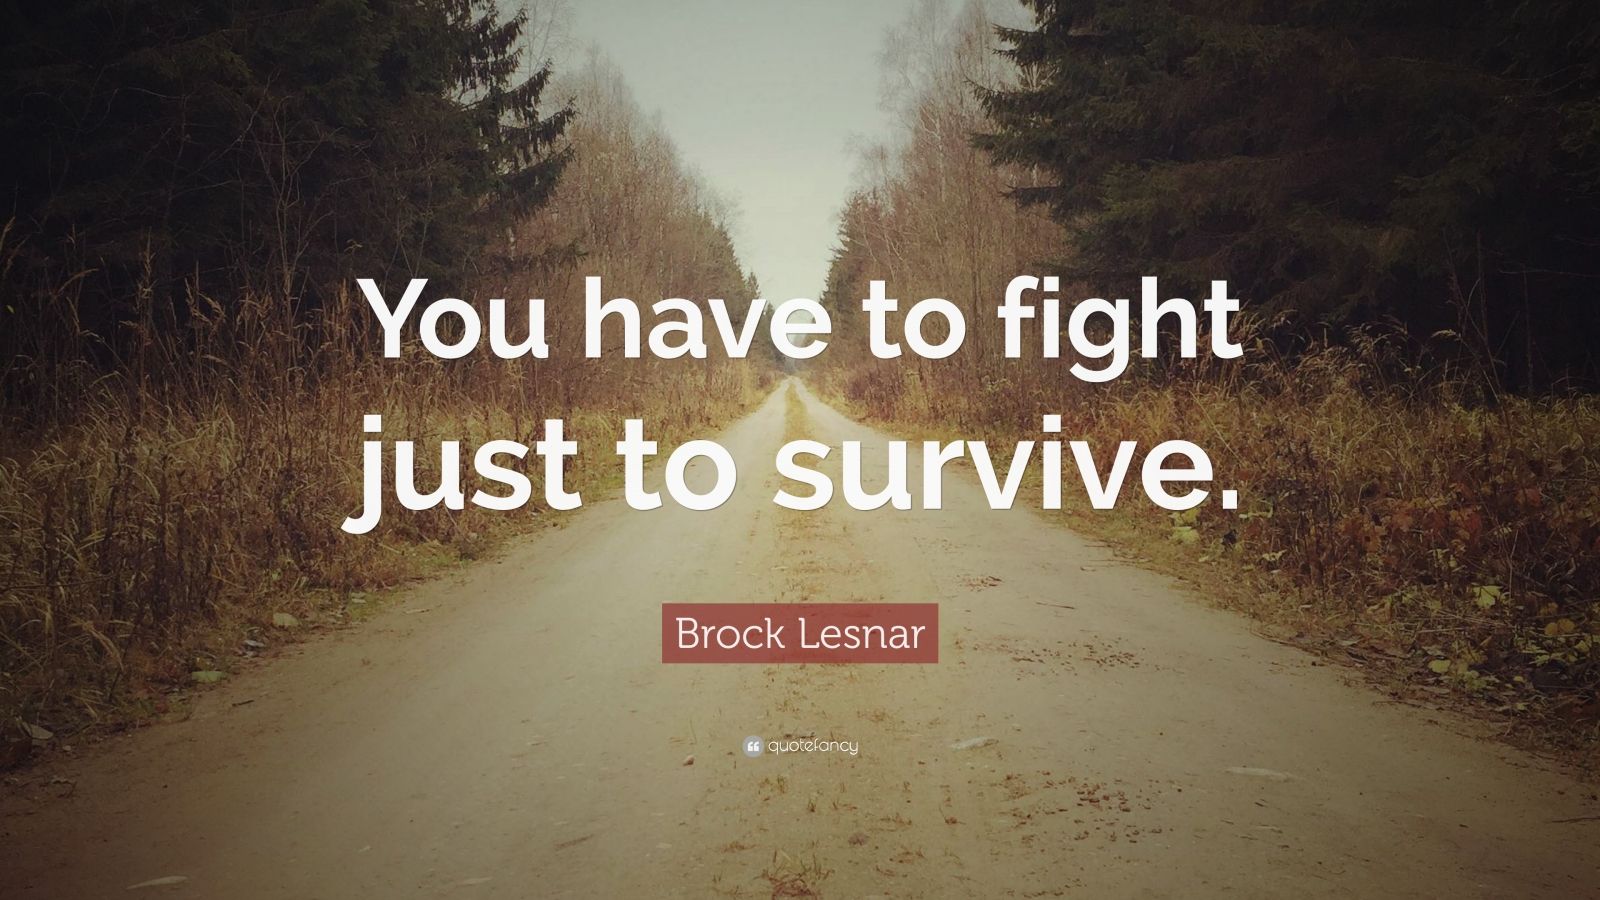 Brock Lesnar Quote: “You have to fight just to survive.” (9 wallpapers